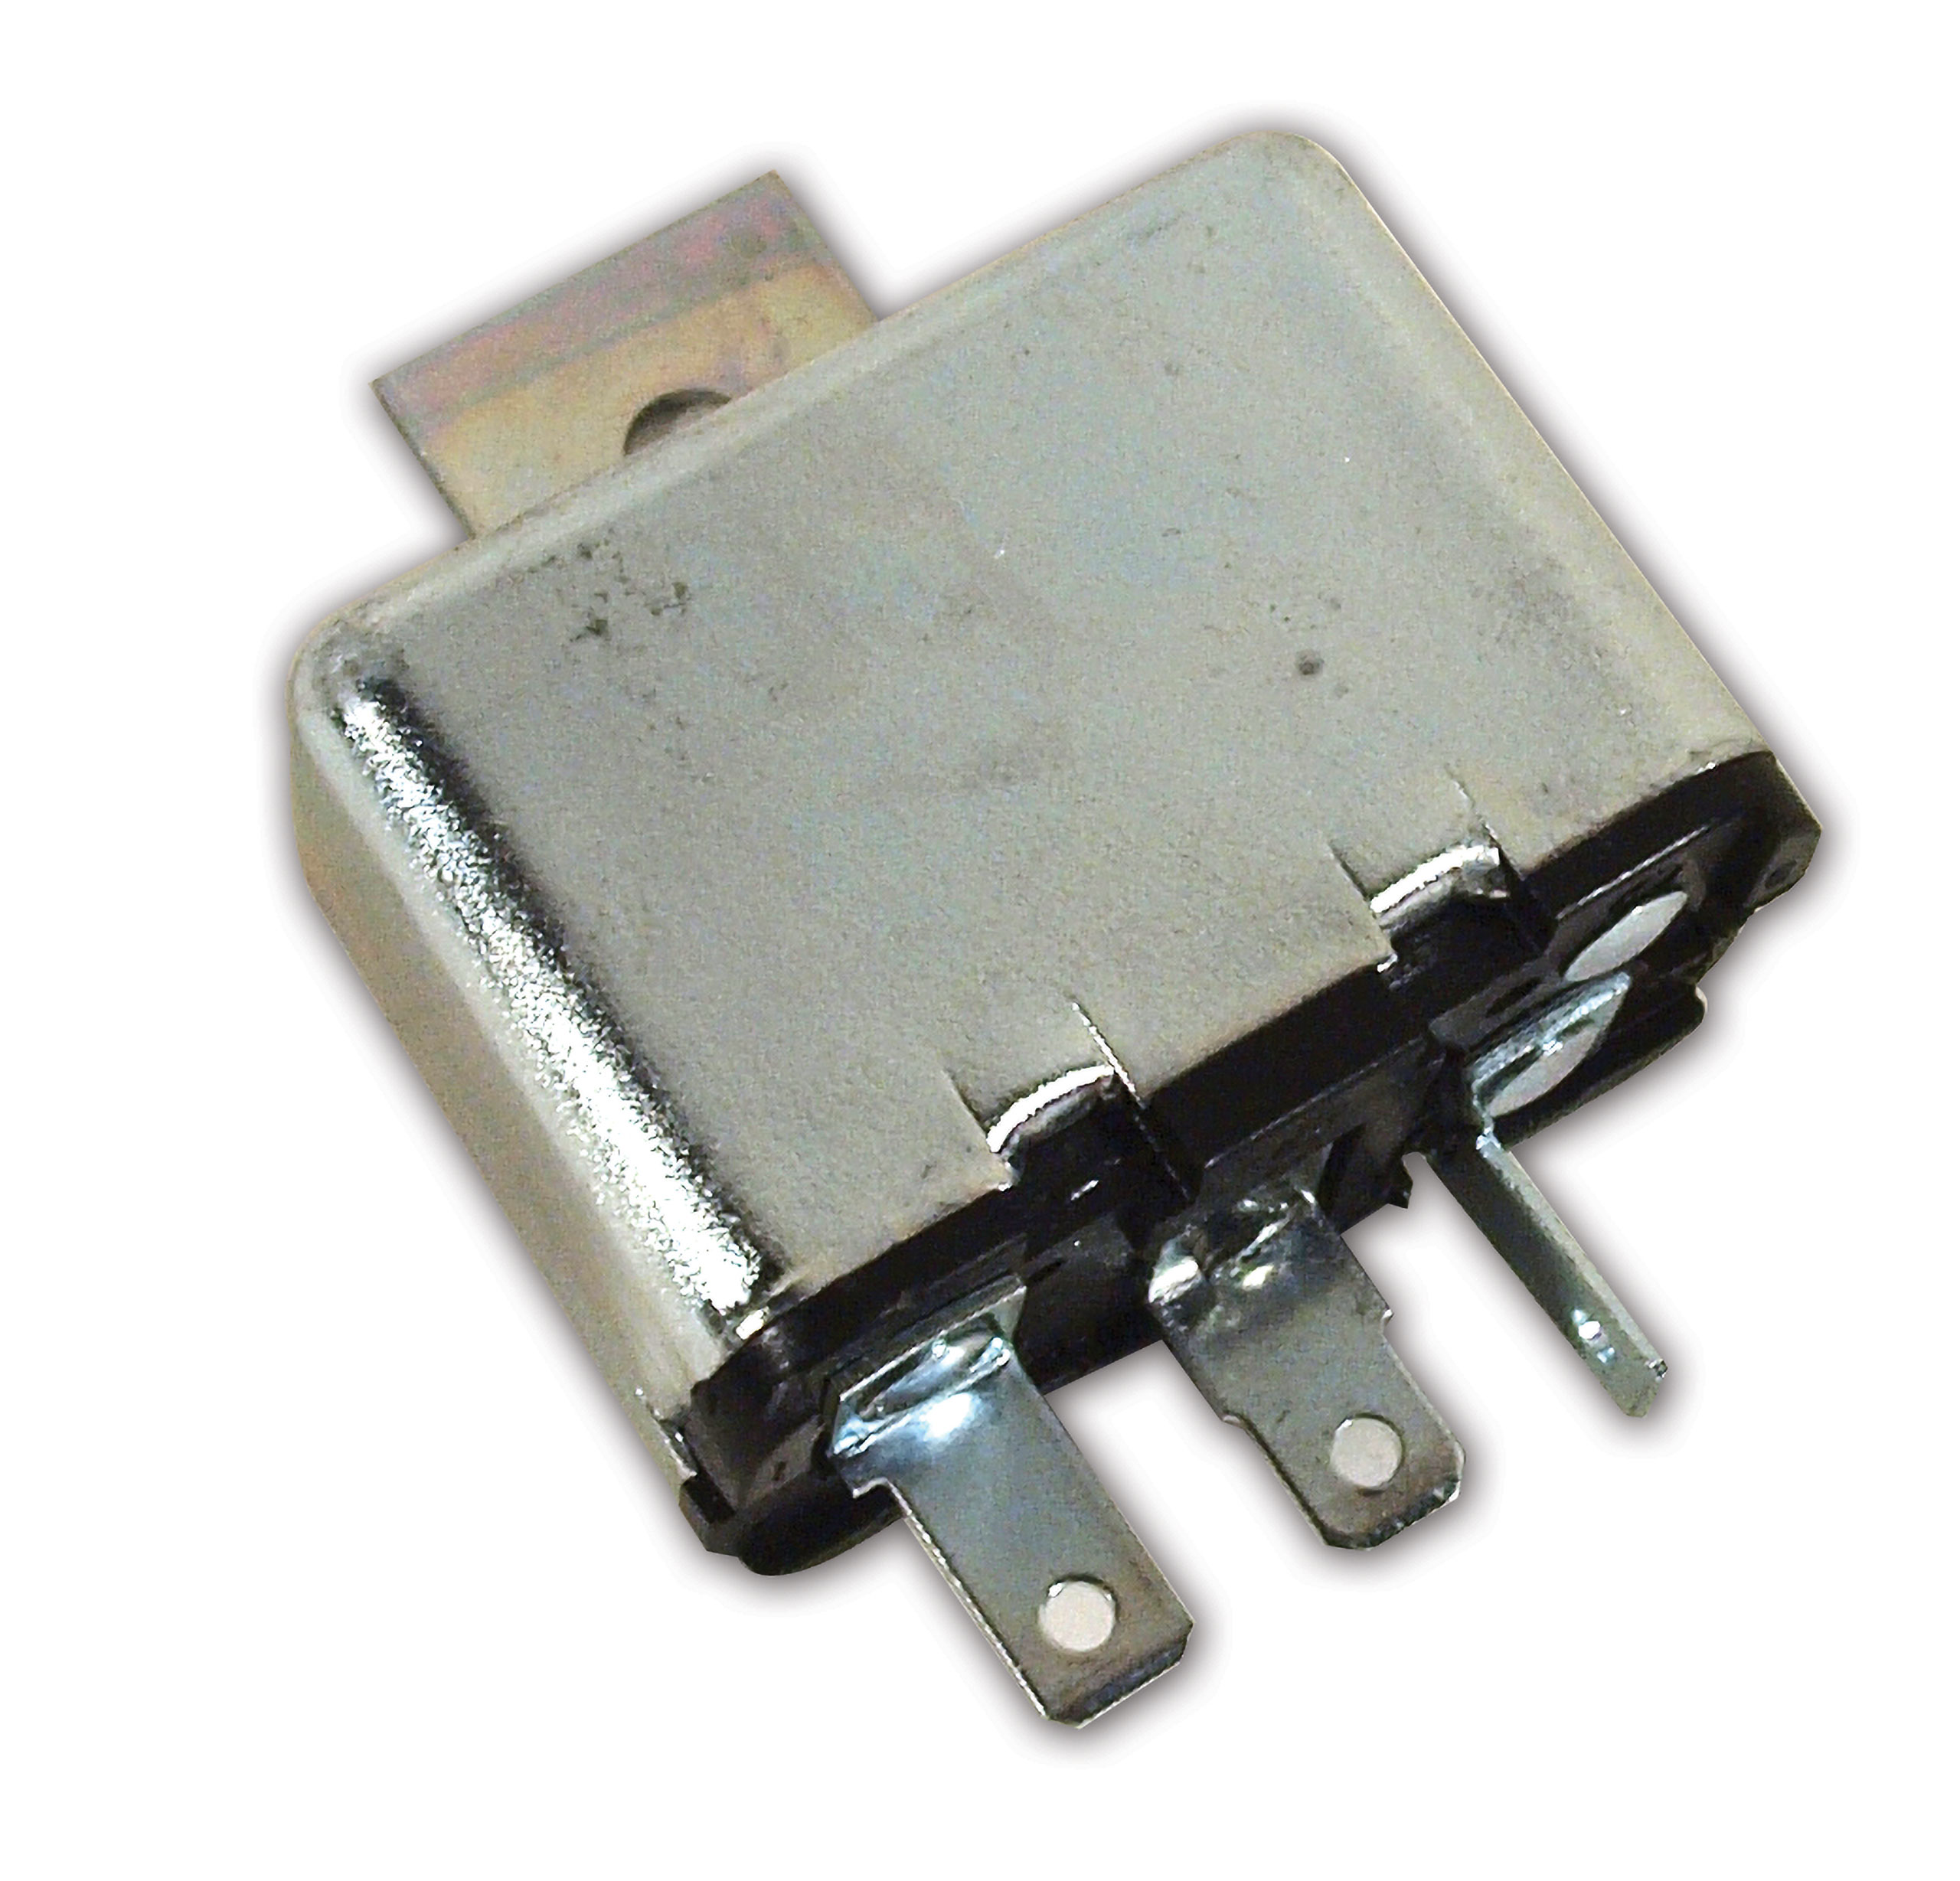 C3 1968-1978 Chevrolet Corvette Power Window Relay. Replacement - Lectric Limited, Inc.